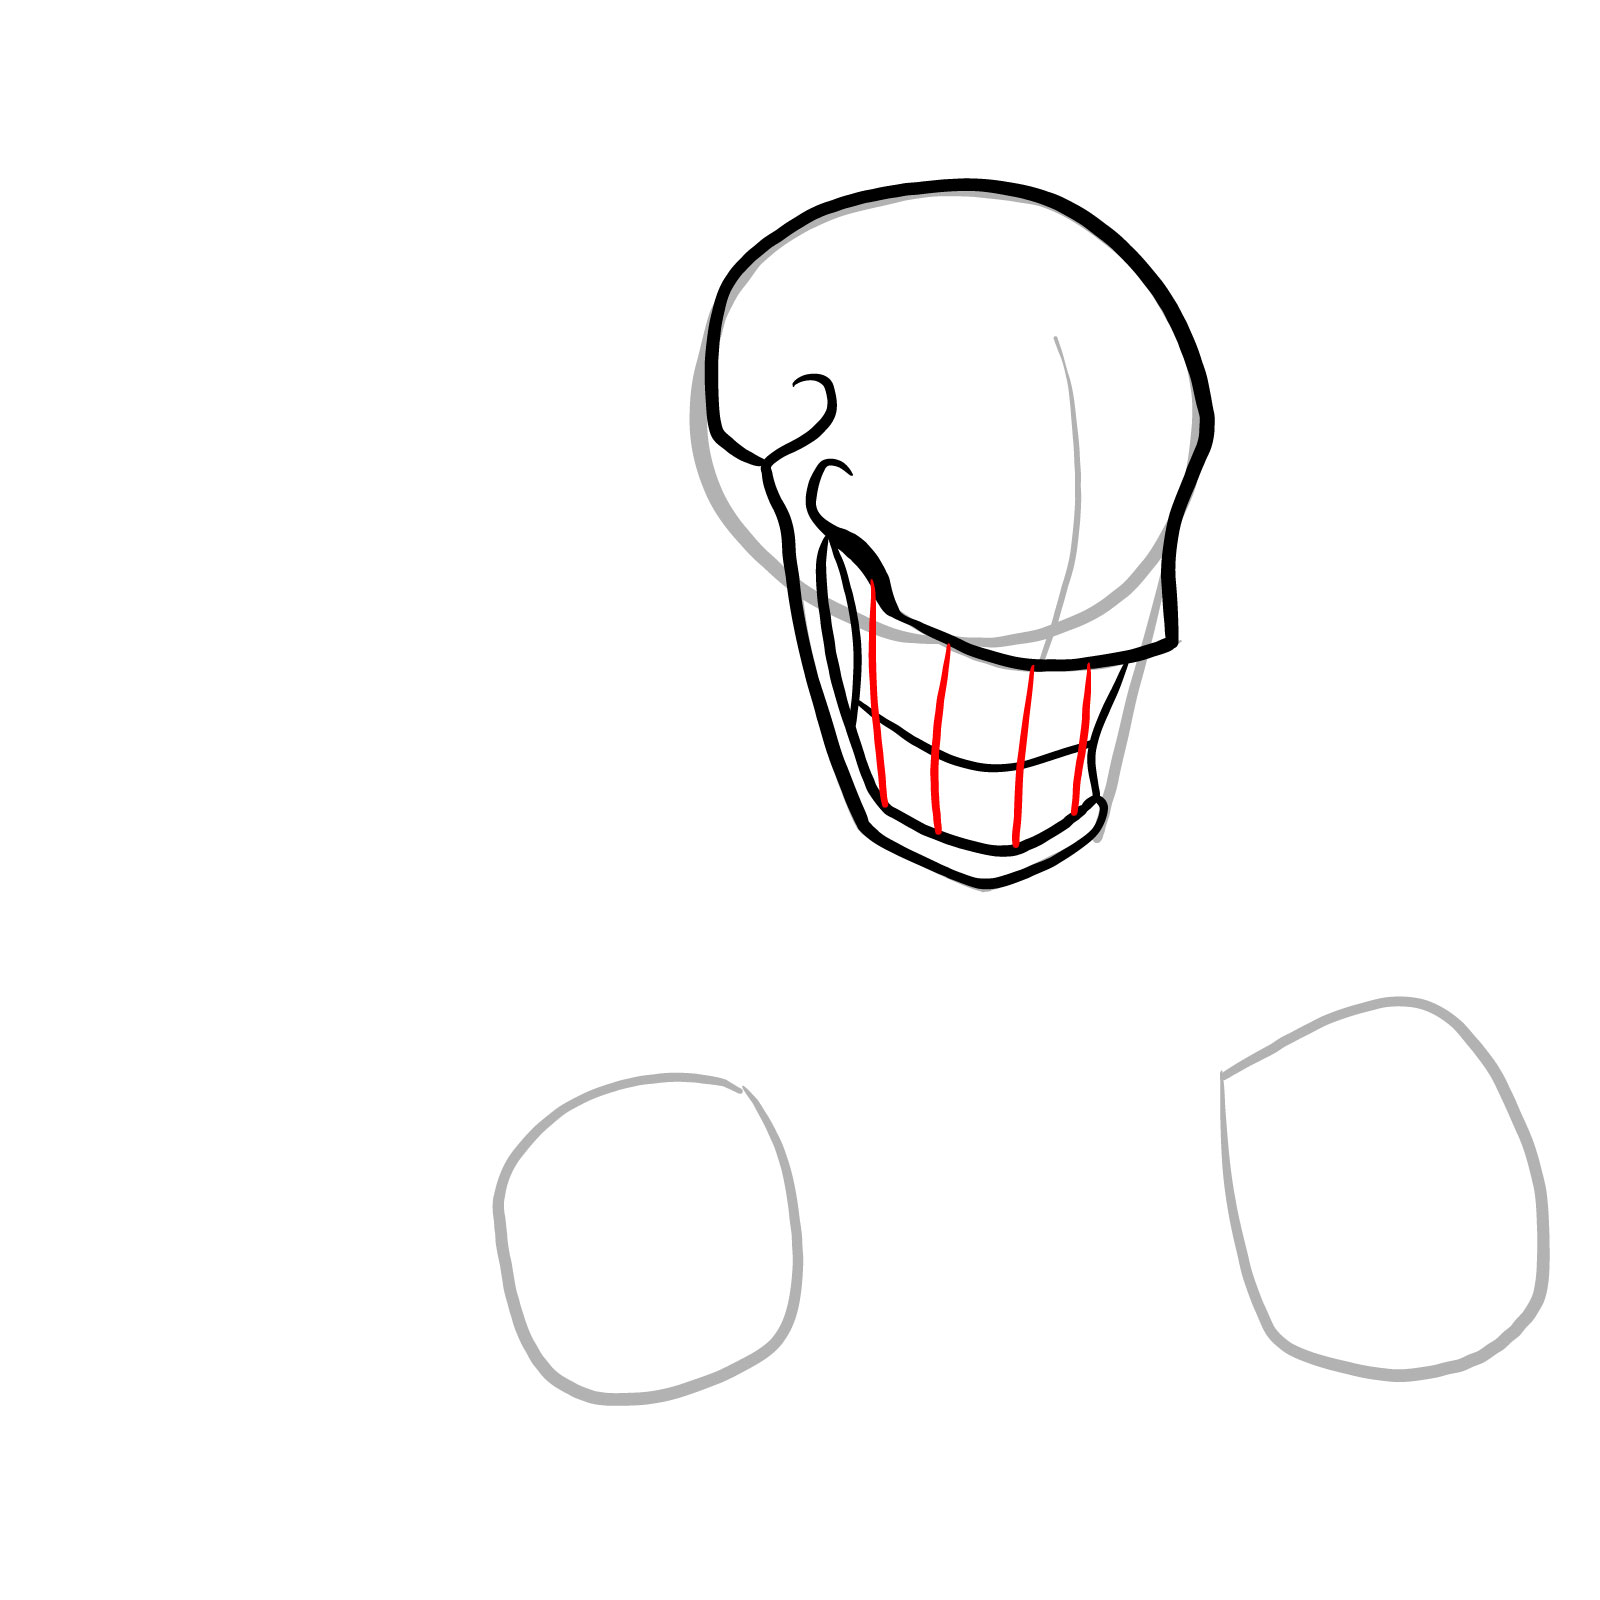 How to draw Phantom!Papyrus from FNF - step 09